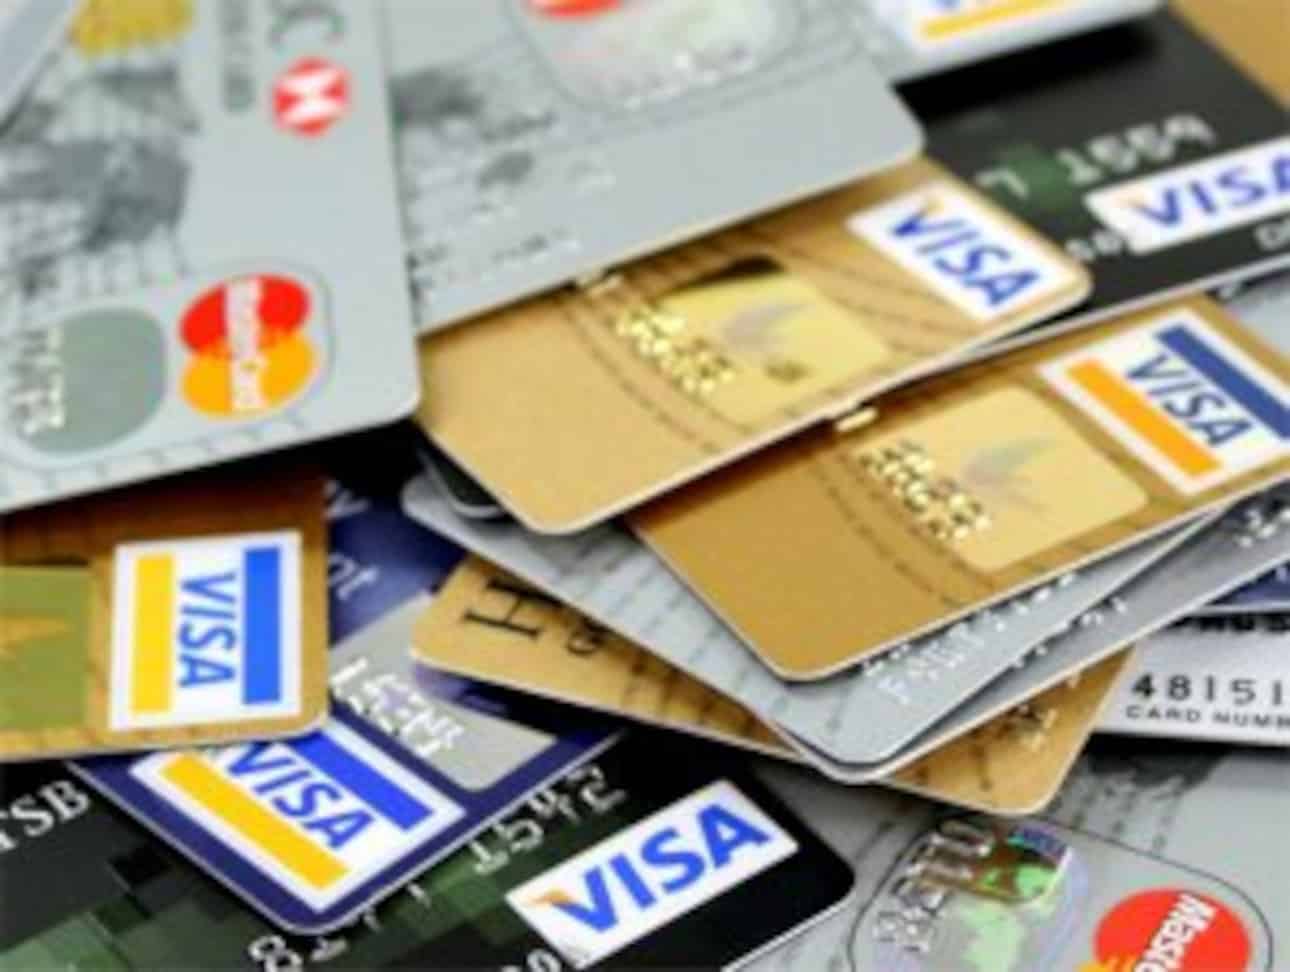 Bust-Out Credit Card Fraud: Definition and Impact